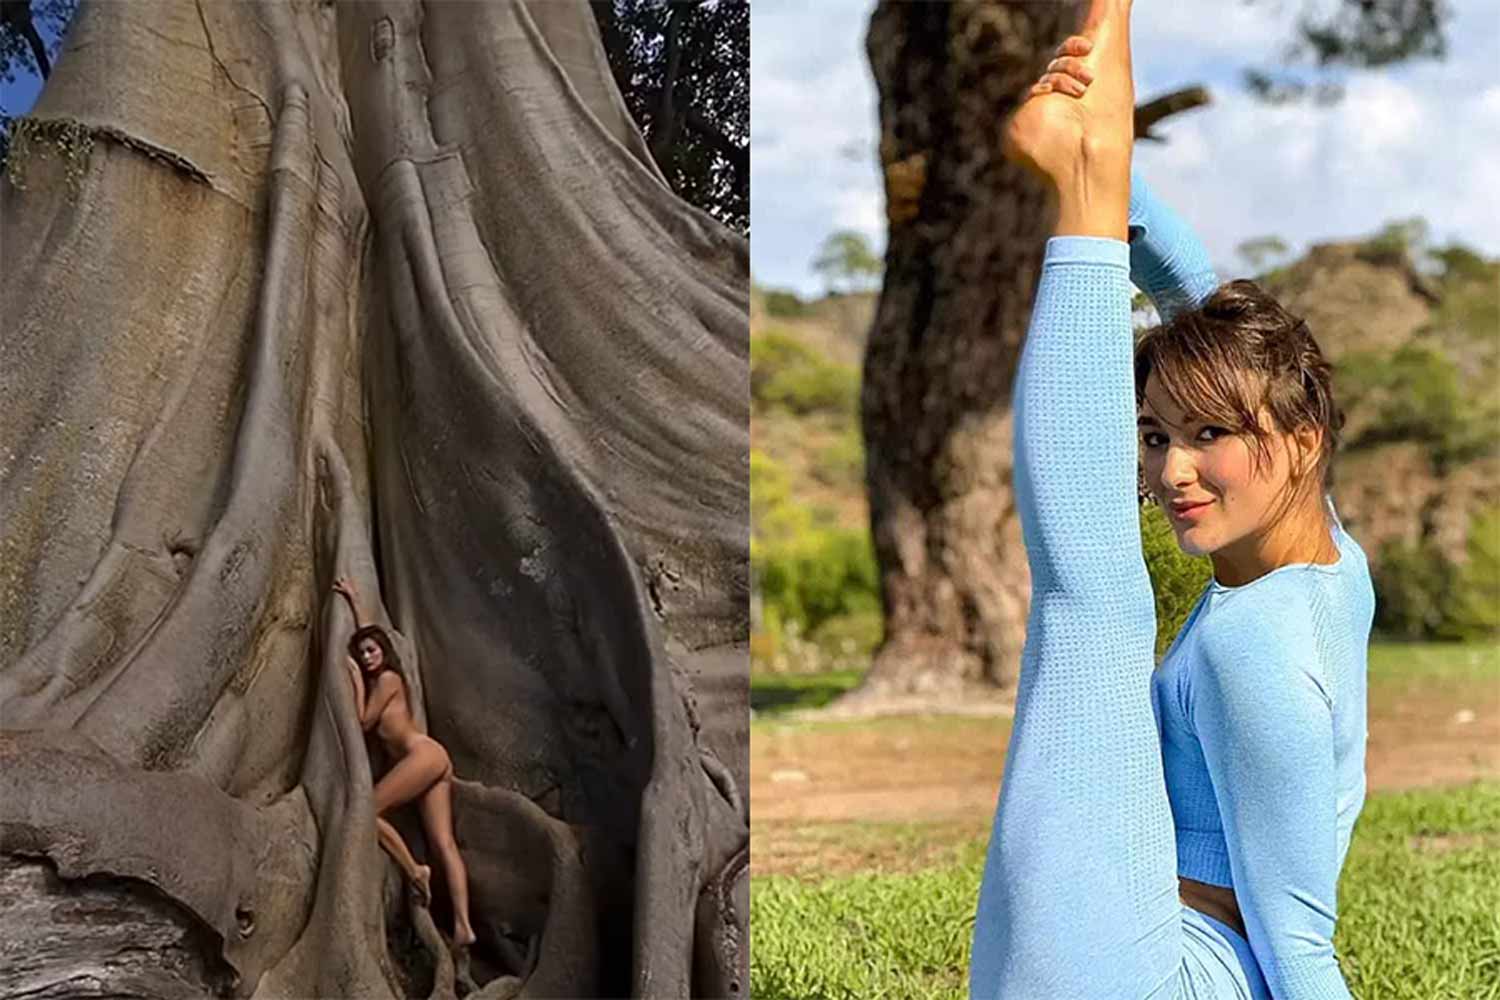 Woman faces deportation from Bali after posing naked with tree